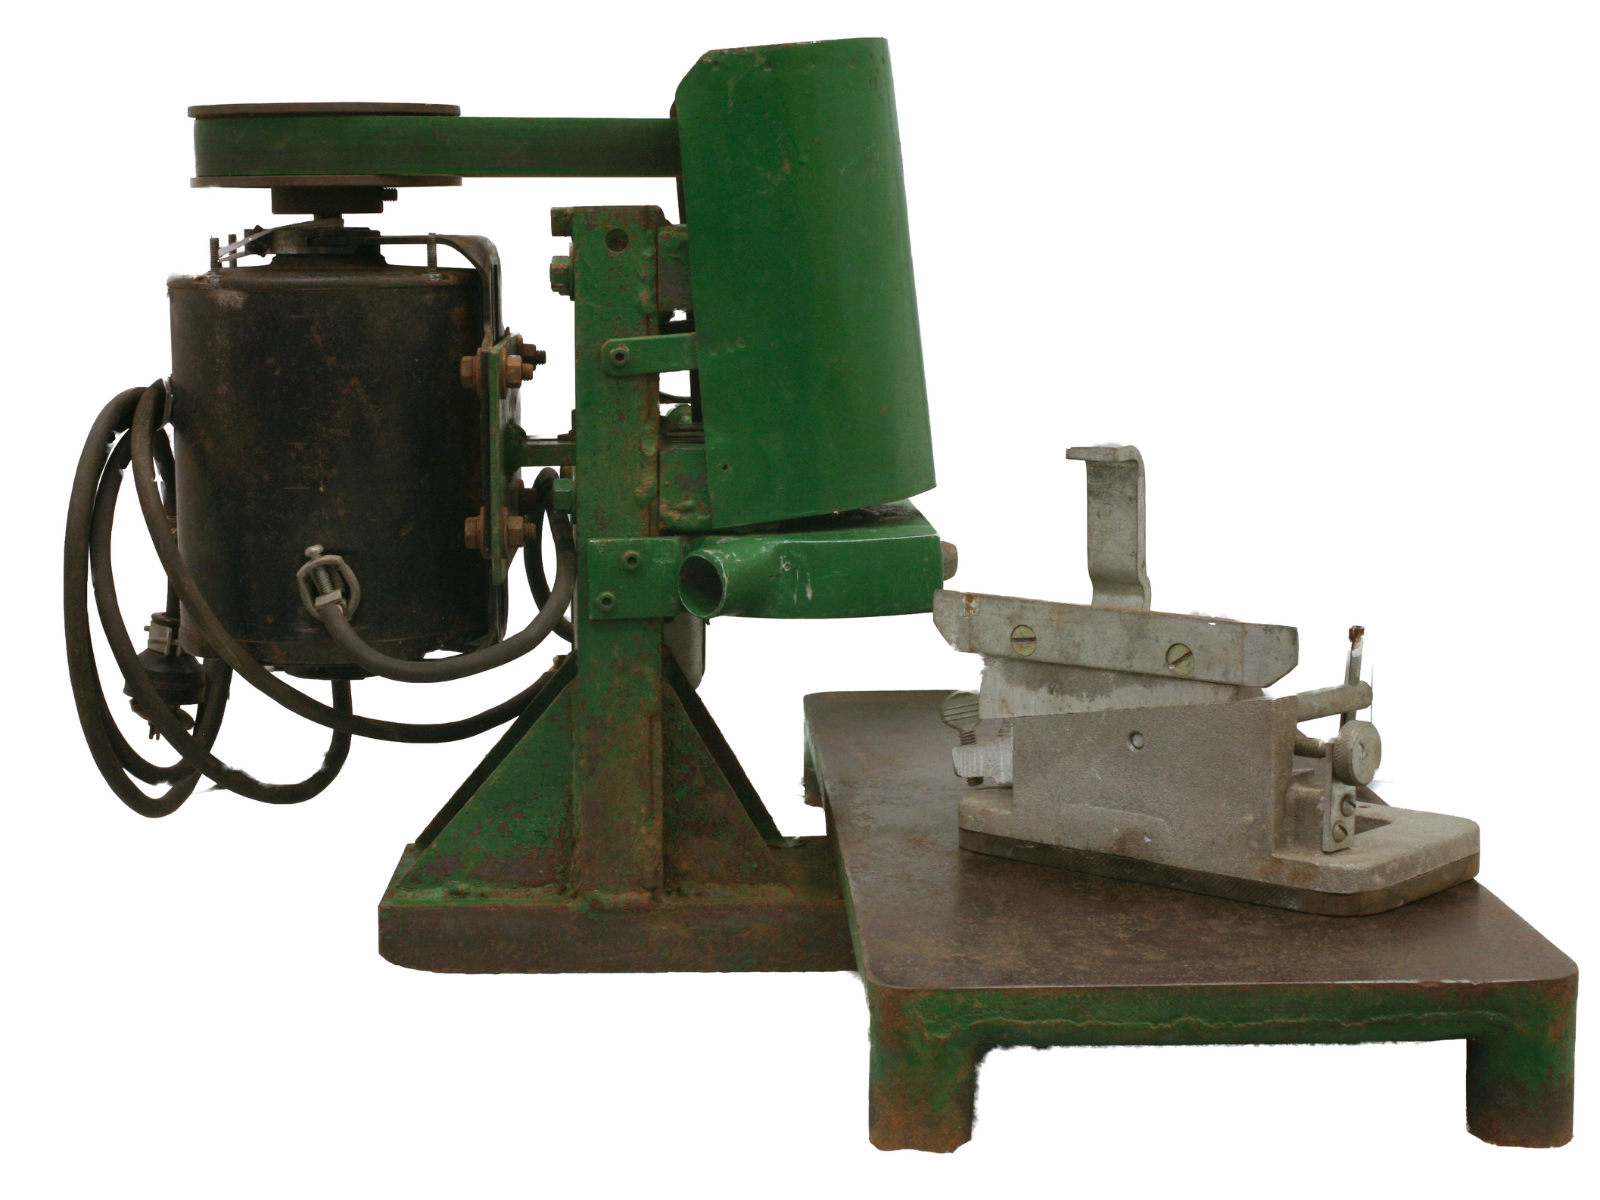 A metal skate sharpener with worn green paint and rust spots.